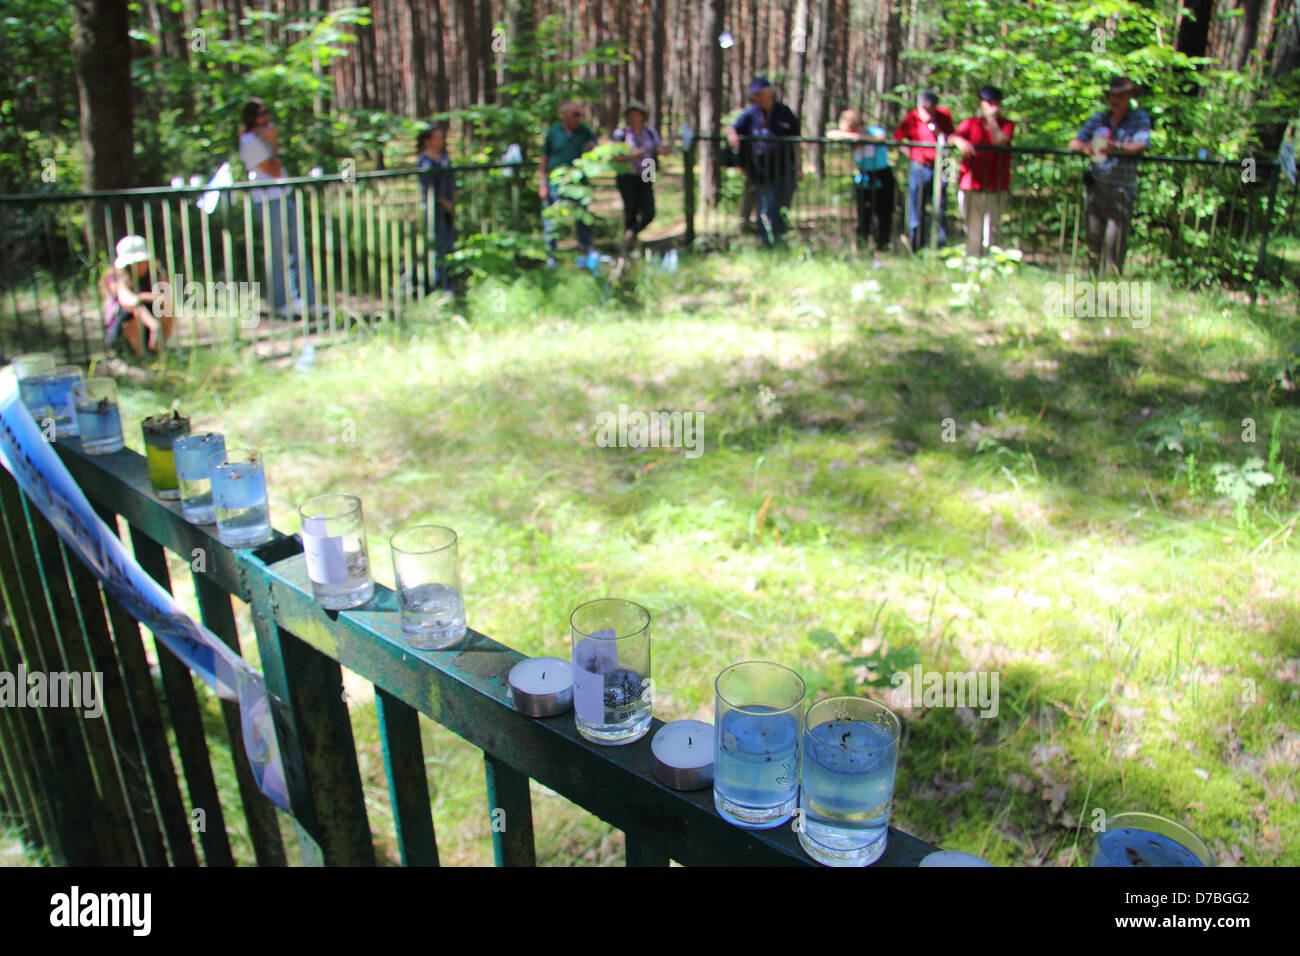 Memorial candles common grave Lopochova Forest Poland where Jews slaughtered Known Tykocin Massacre Stock Photo